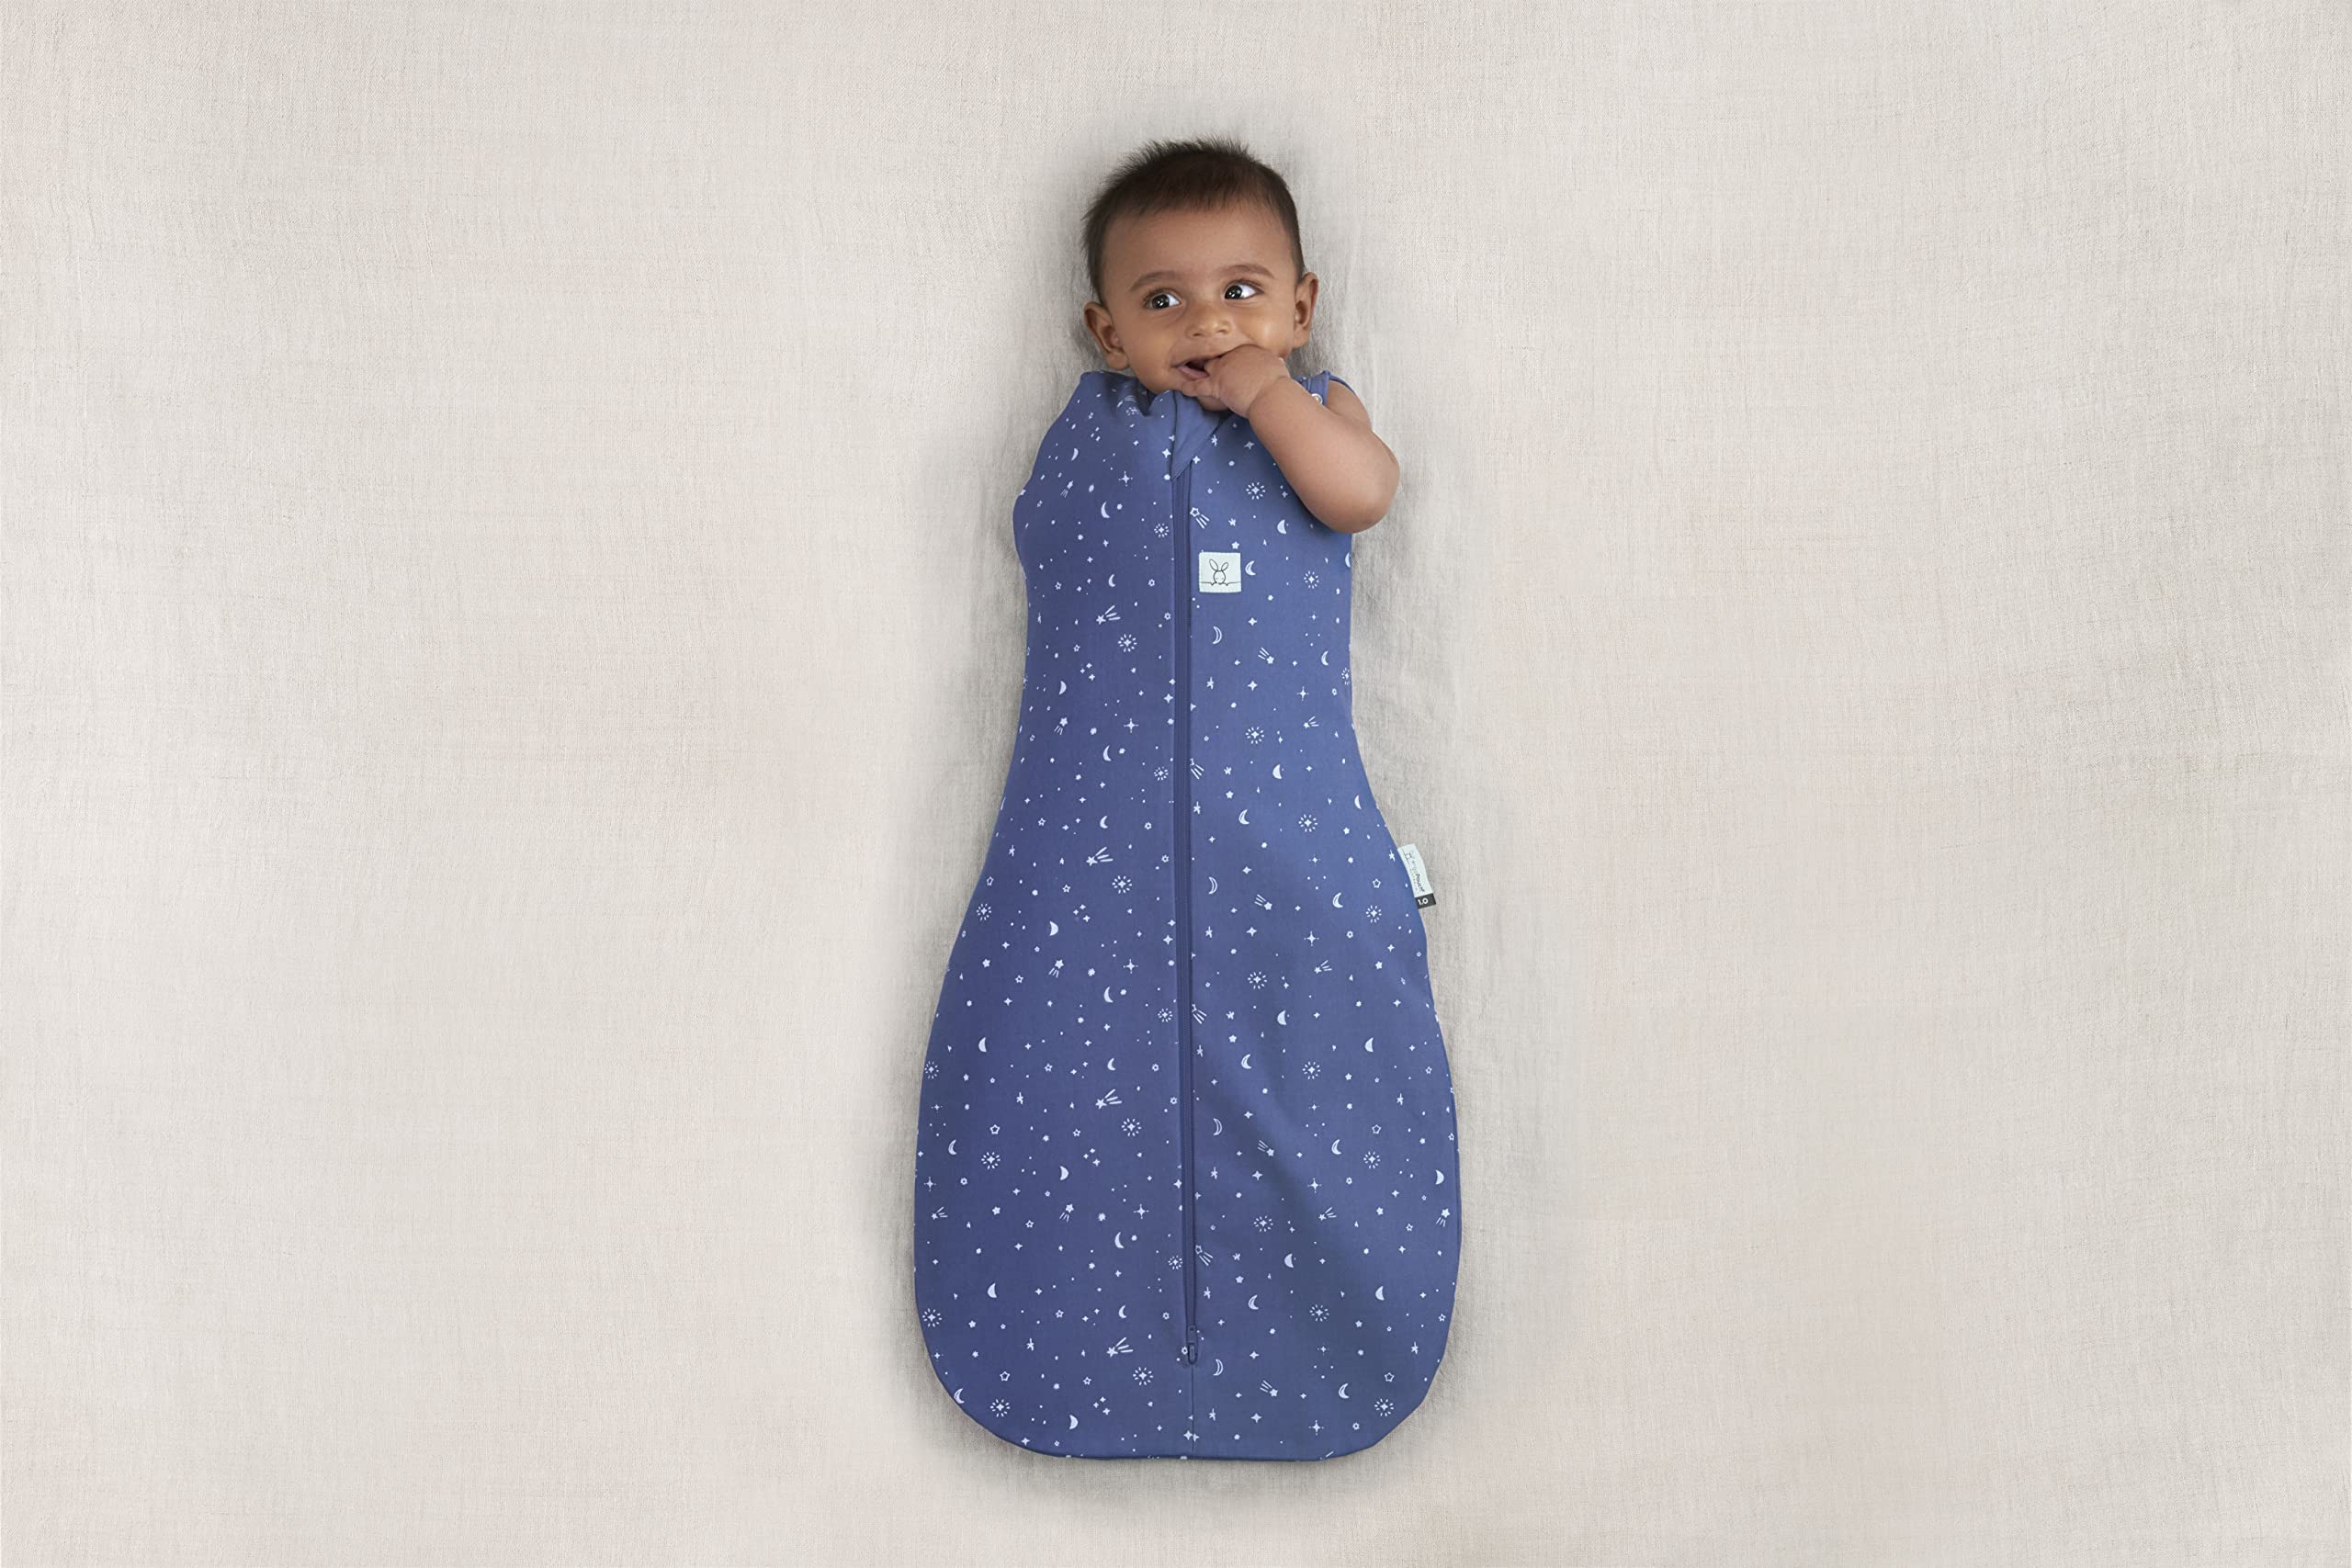 ergoPouch 1 tog Baby Sleep Sack 0-3 Months - Baby Sleeping Sack for Warm & Cozy Nights - Cocoon Swaddle Sack Baby Keeps Calm & Relaxed (Night Sky)